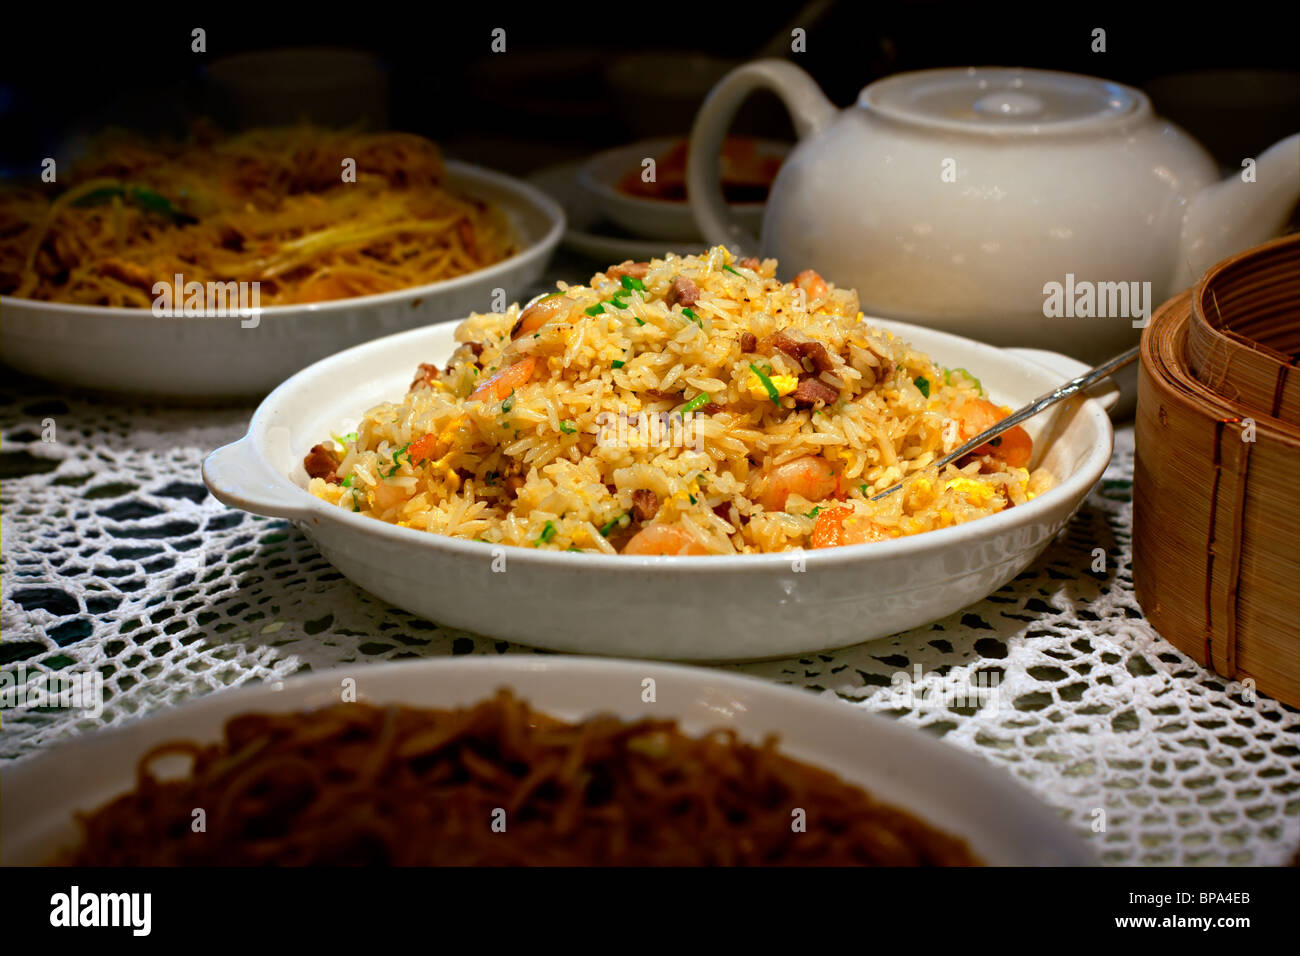 Chinese style vegetable fried rice served in a bowl Stock Photo